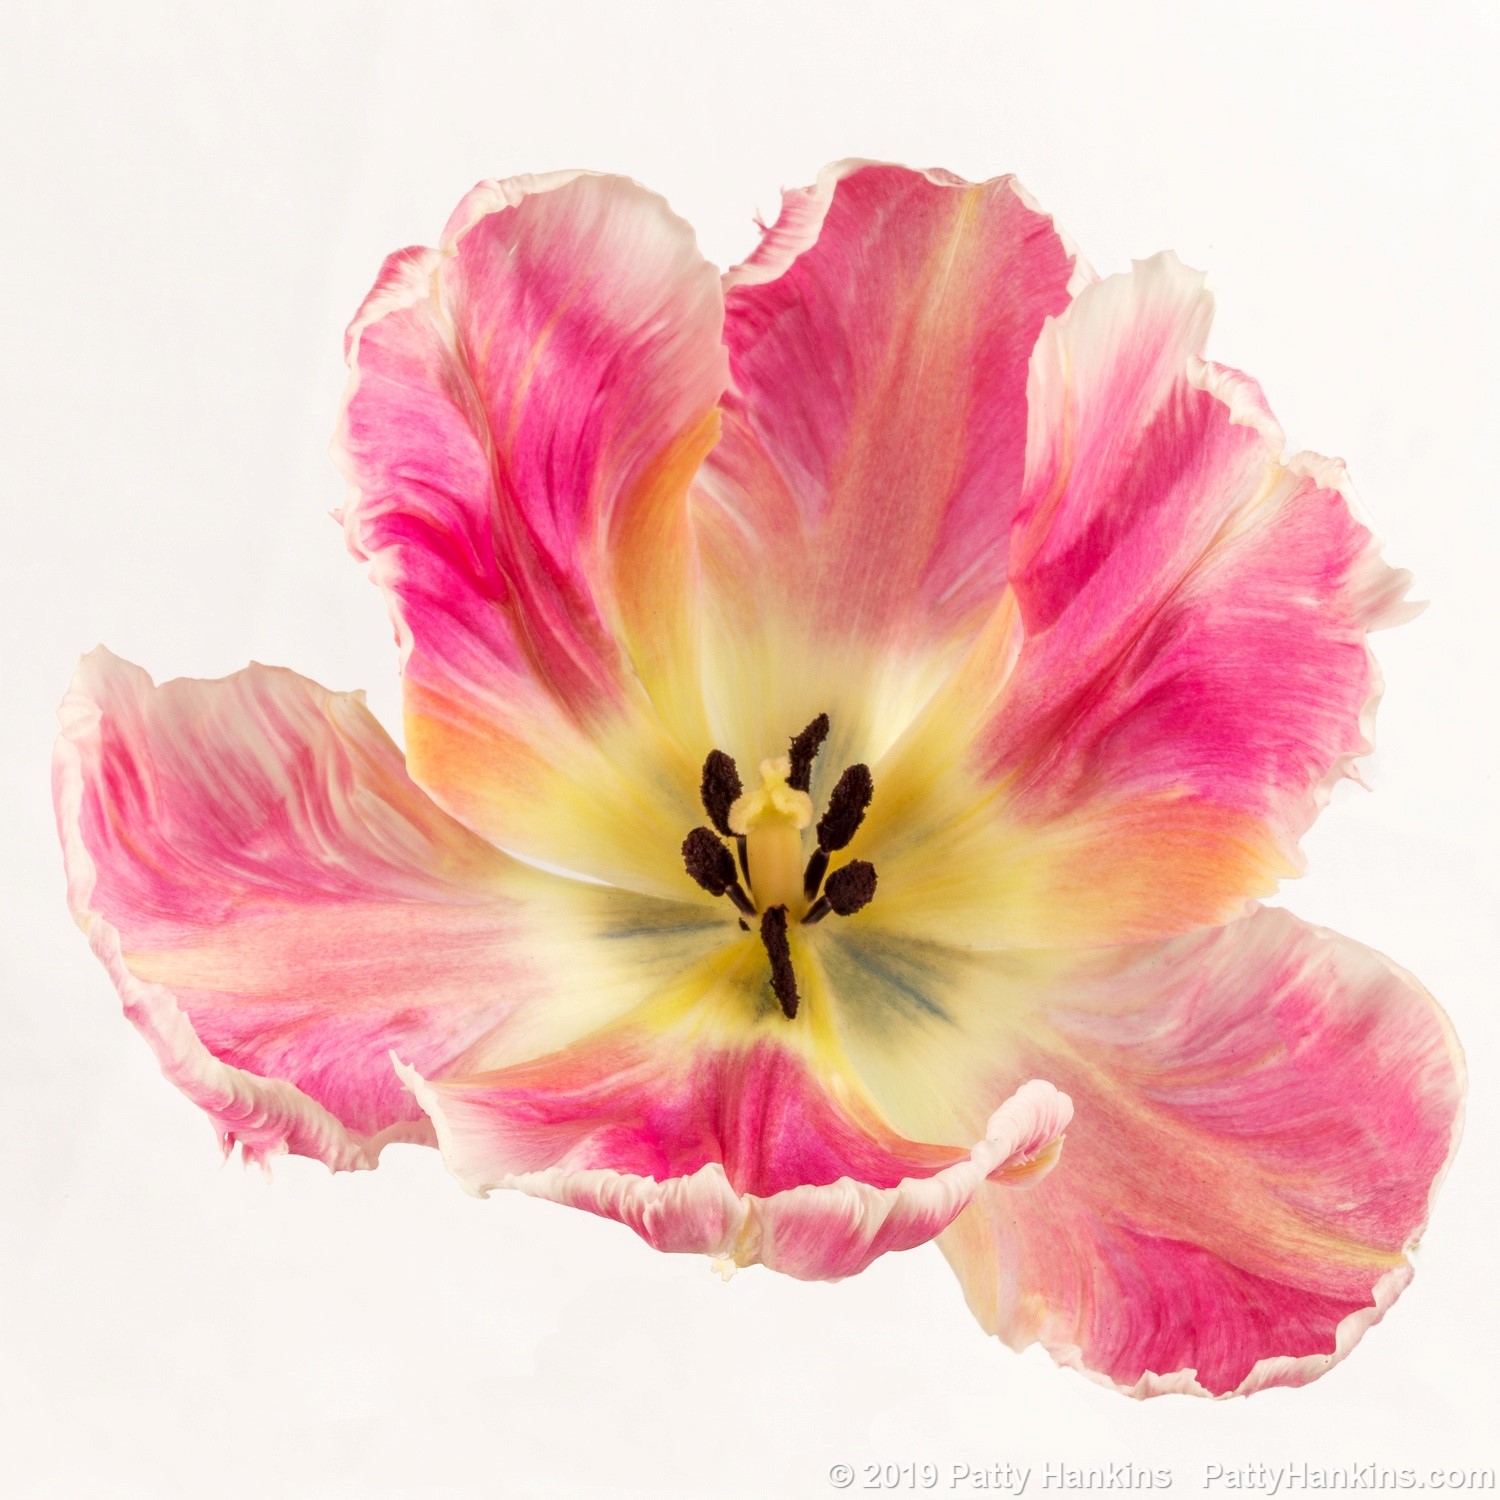 Pink & White Parrot Tulip © 2019 Patty HankinsPink & White Parrot Tulip © 2019 Patty Hankins